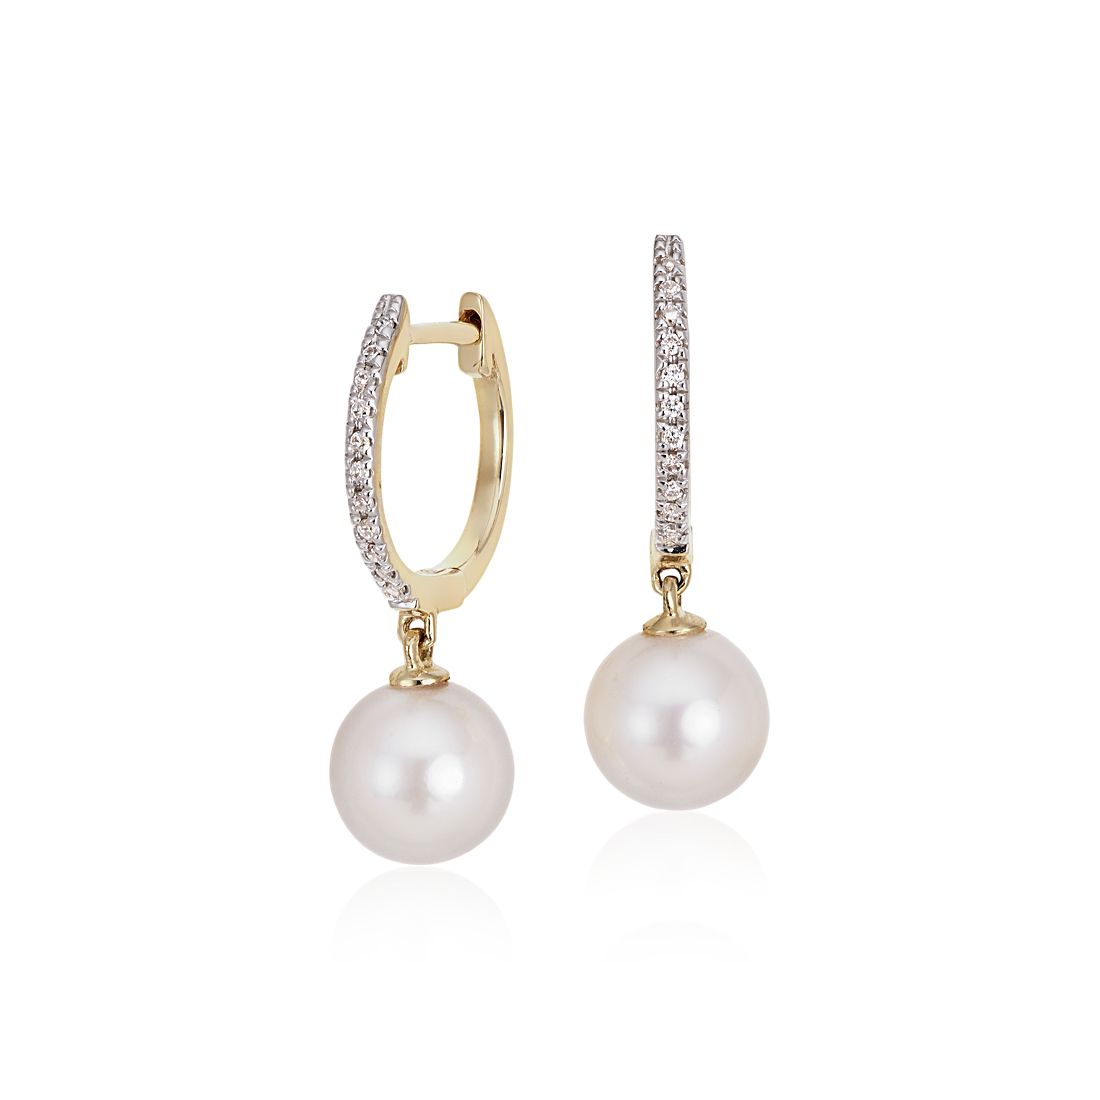 6-6.5mm White Round Akoya Saltwater Cultured Pearls and Diamonds 0.06 cttw in 14K Gold Lever-back Huggie Ball Earrings Handpicked AAA 